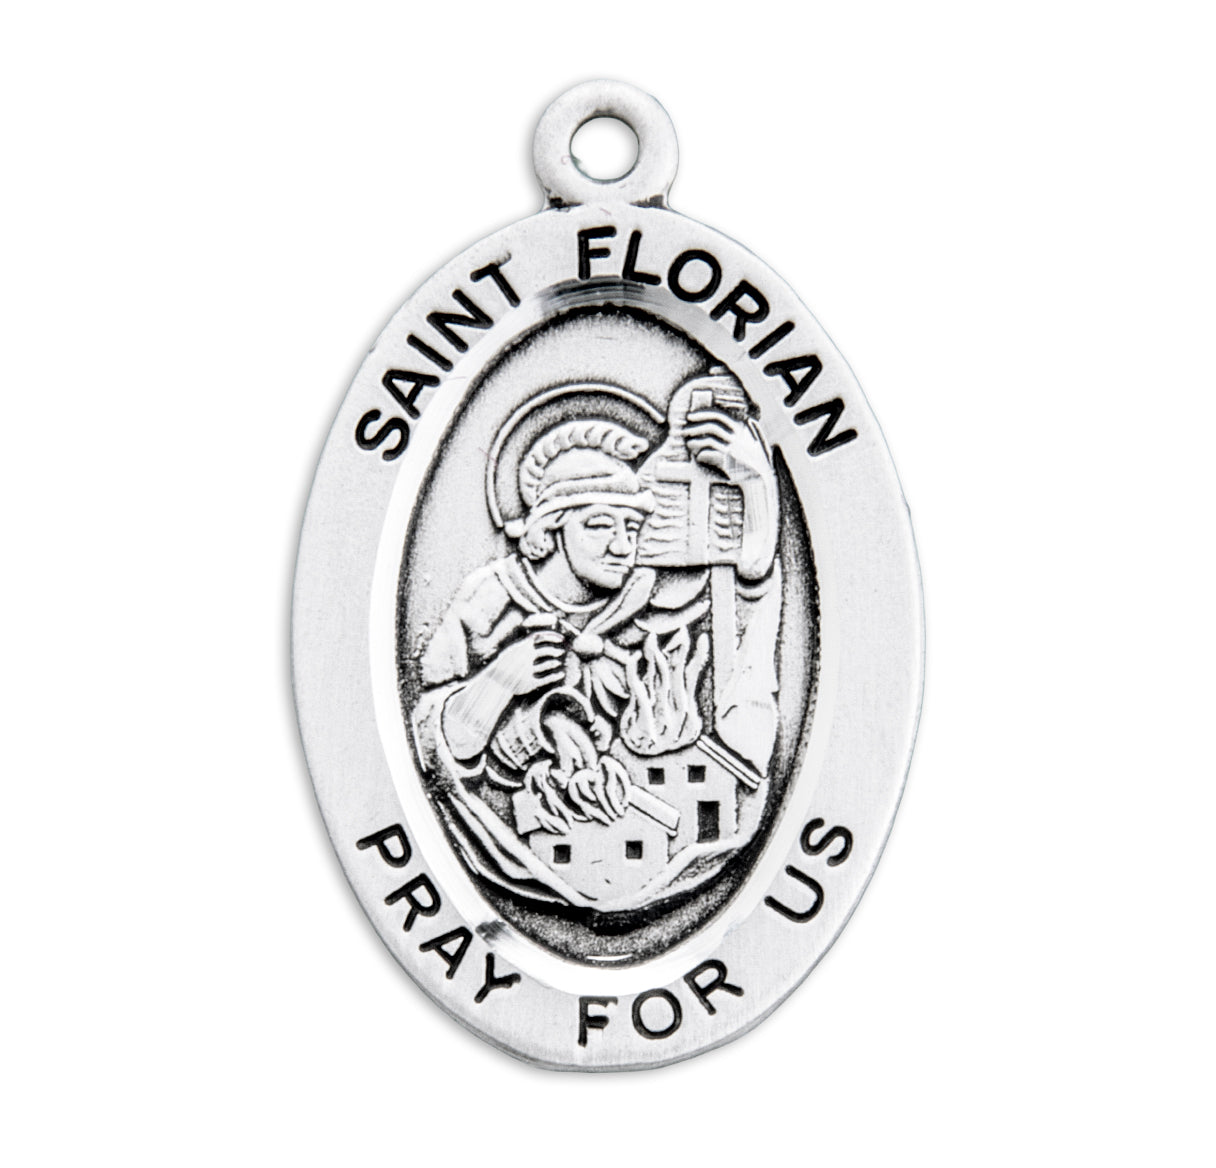 Patron Saint Florian Oval Sterling Silver Medal